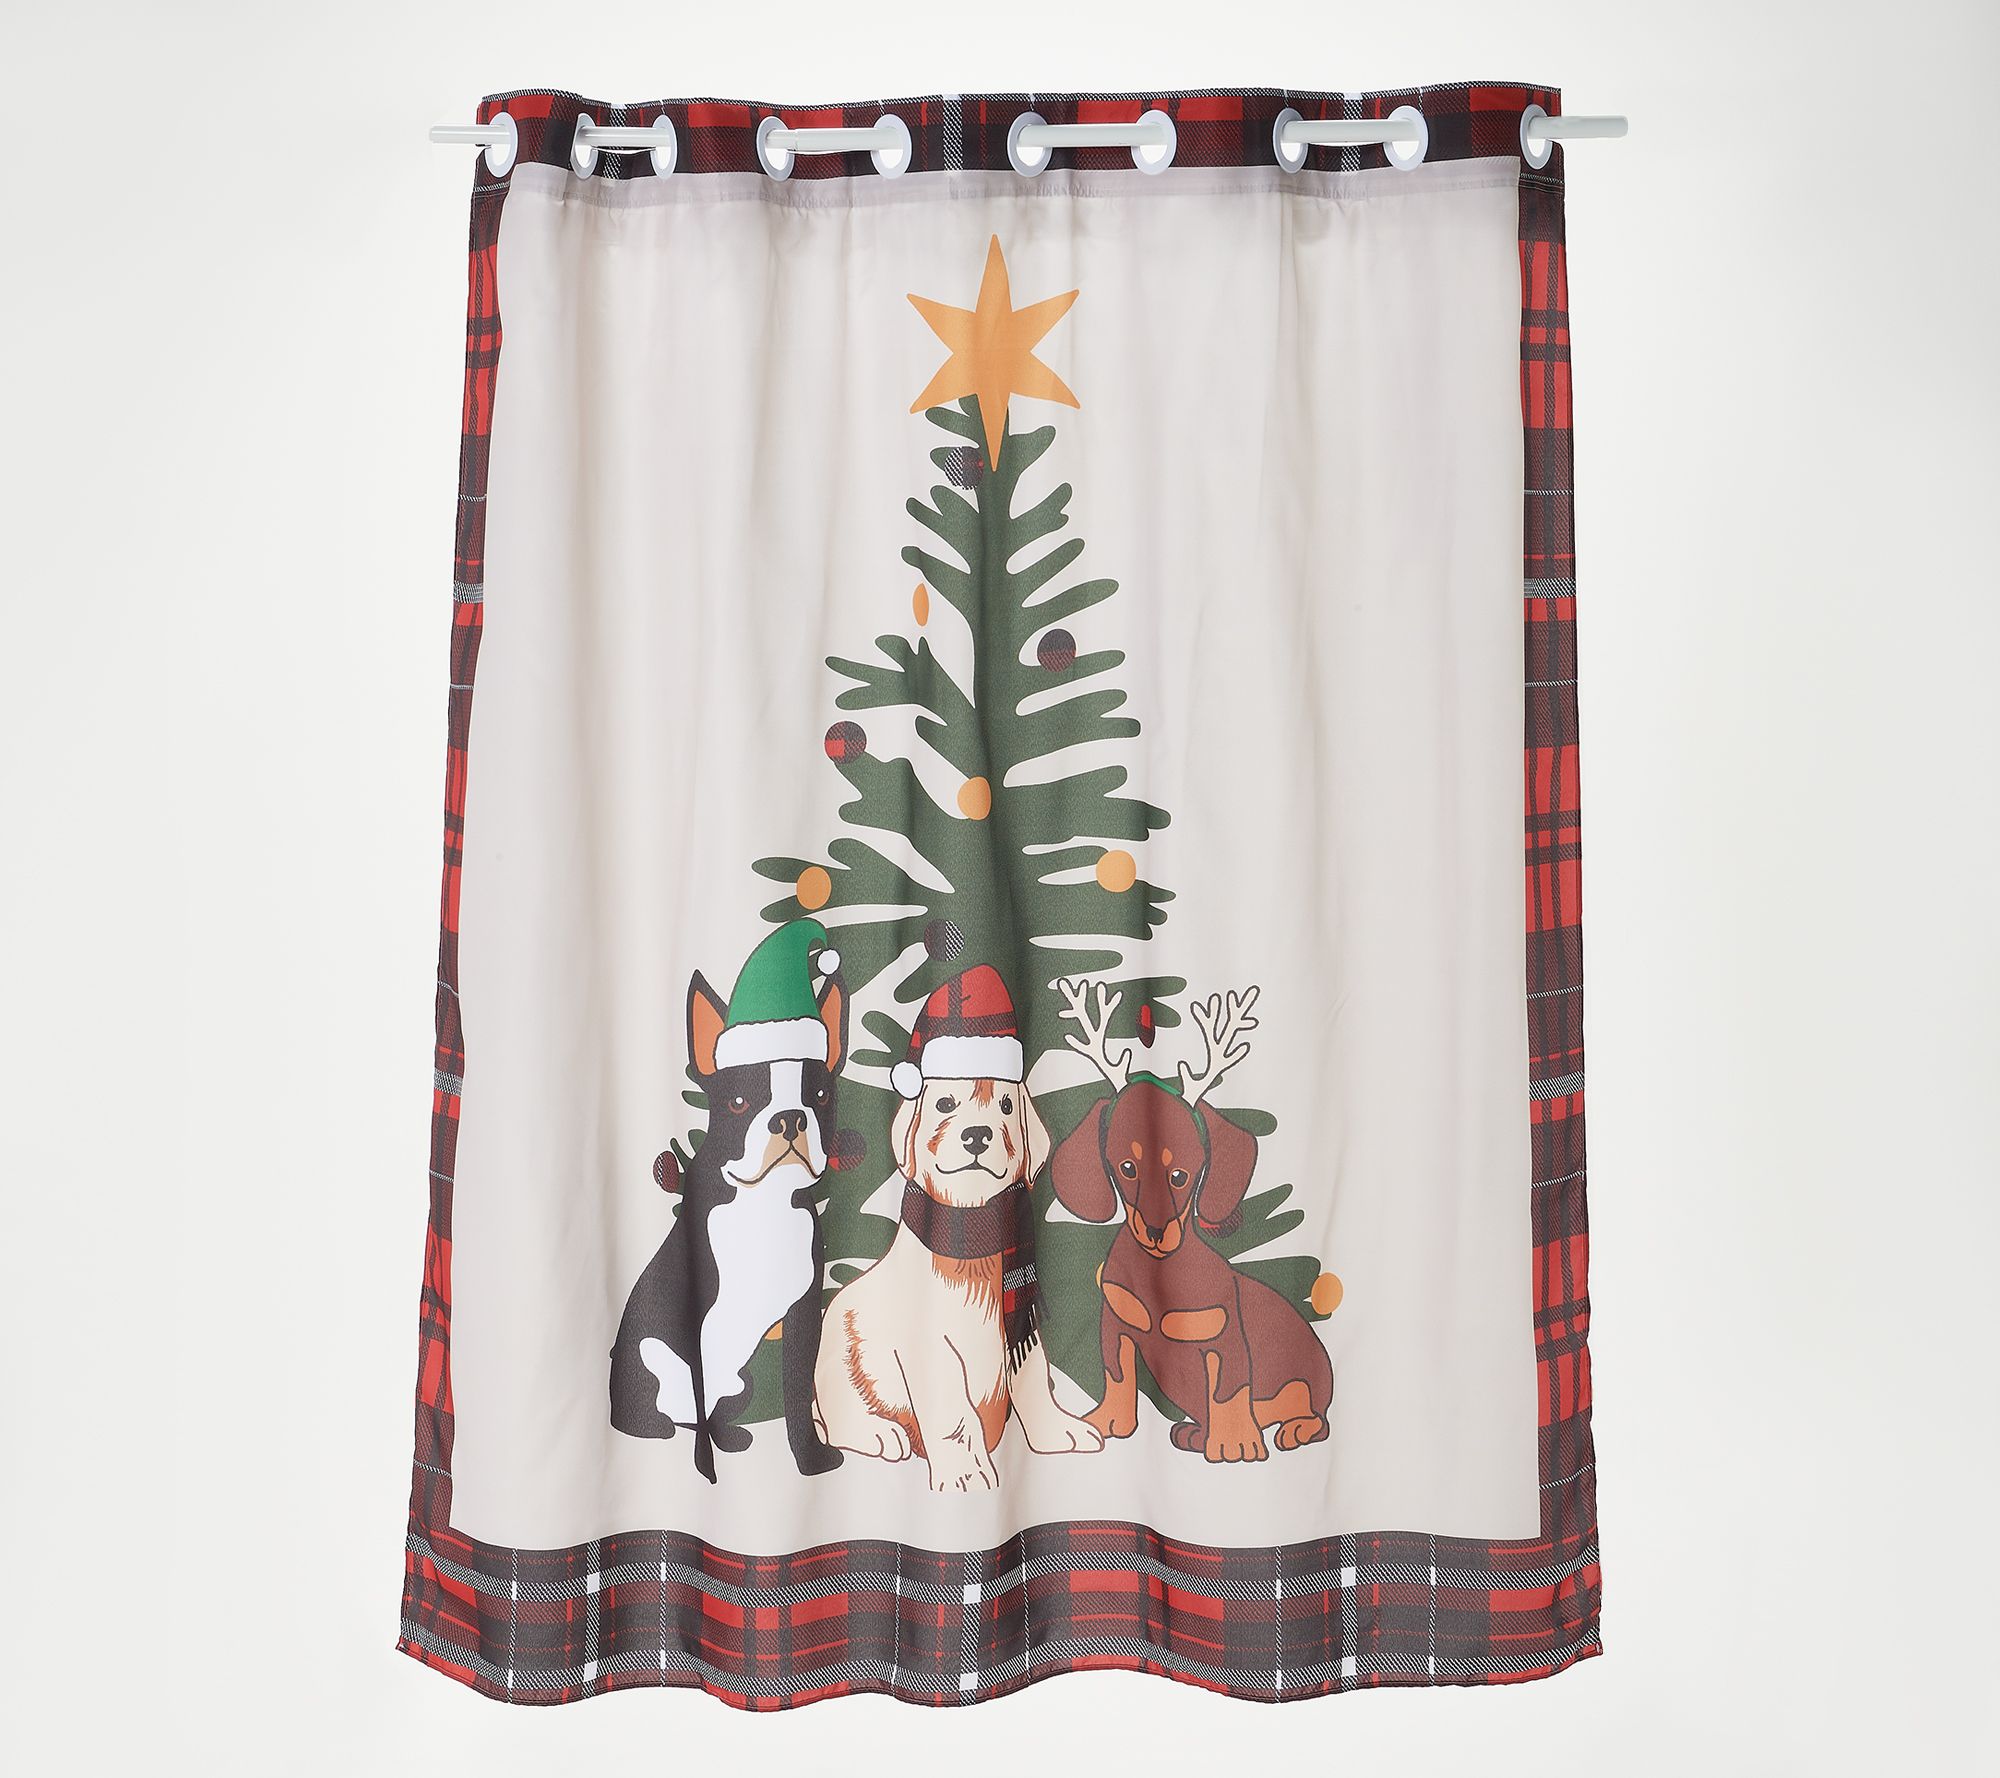 Hookless Holiday Shower Curtain Qvc Com